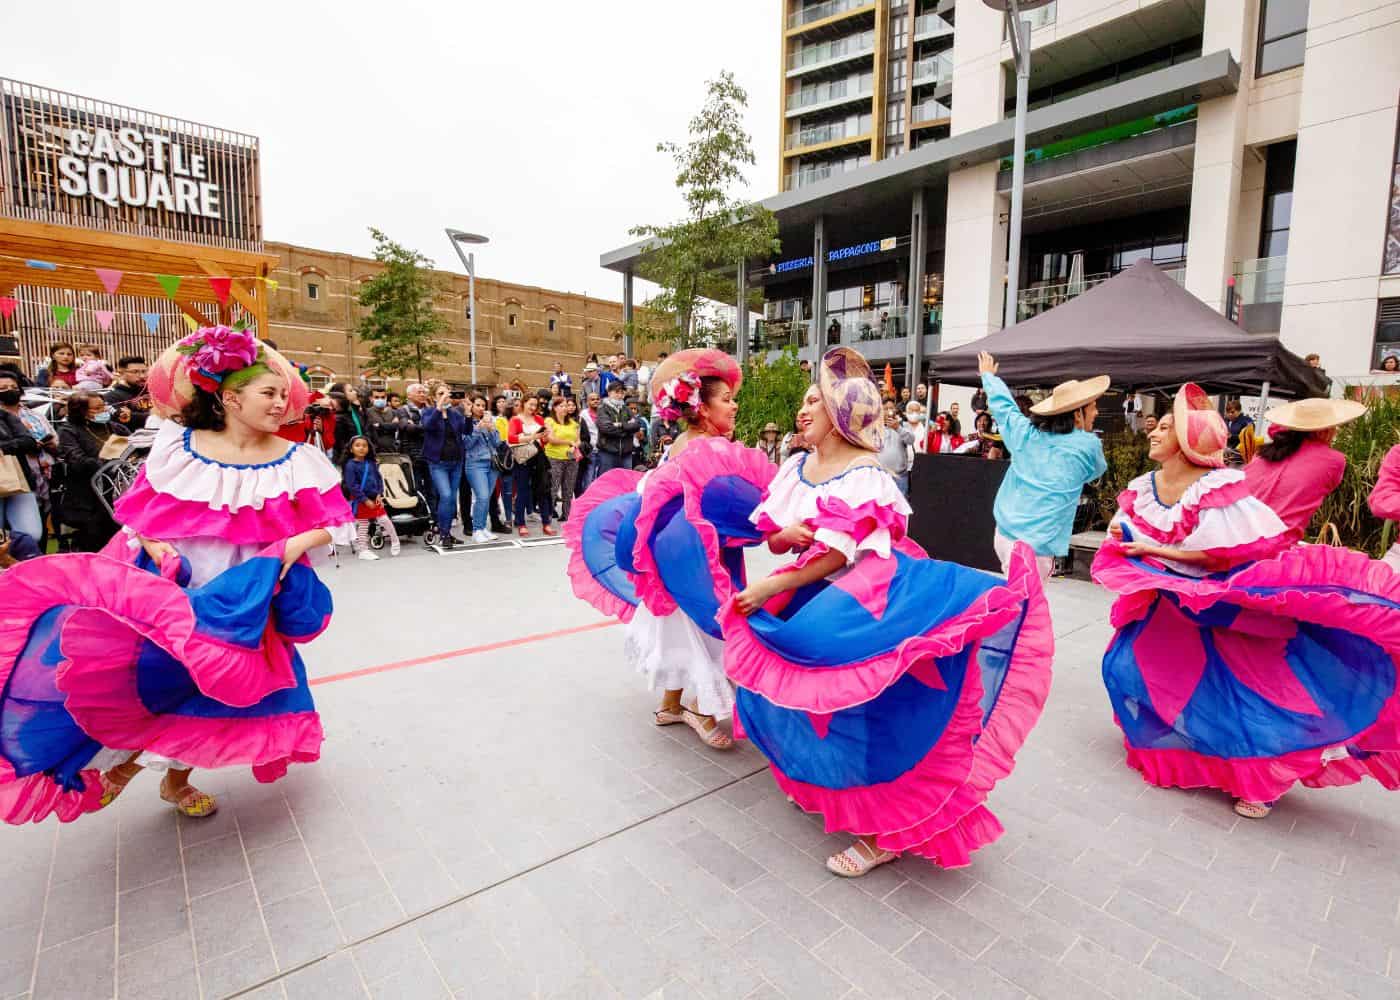 Women dancing in Castle Square wearing traditional Latin American dresses with a crowd watching